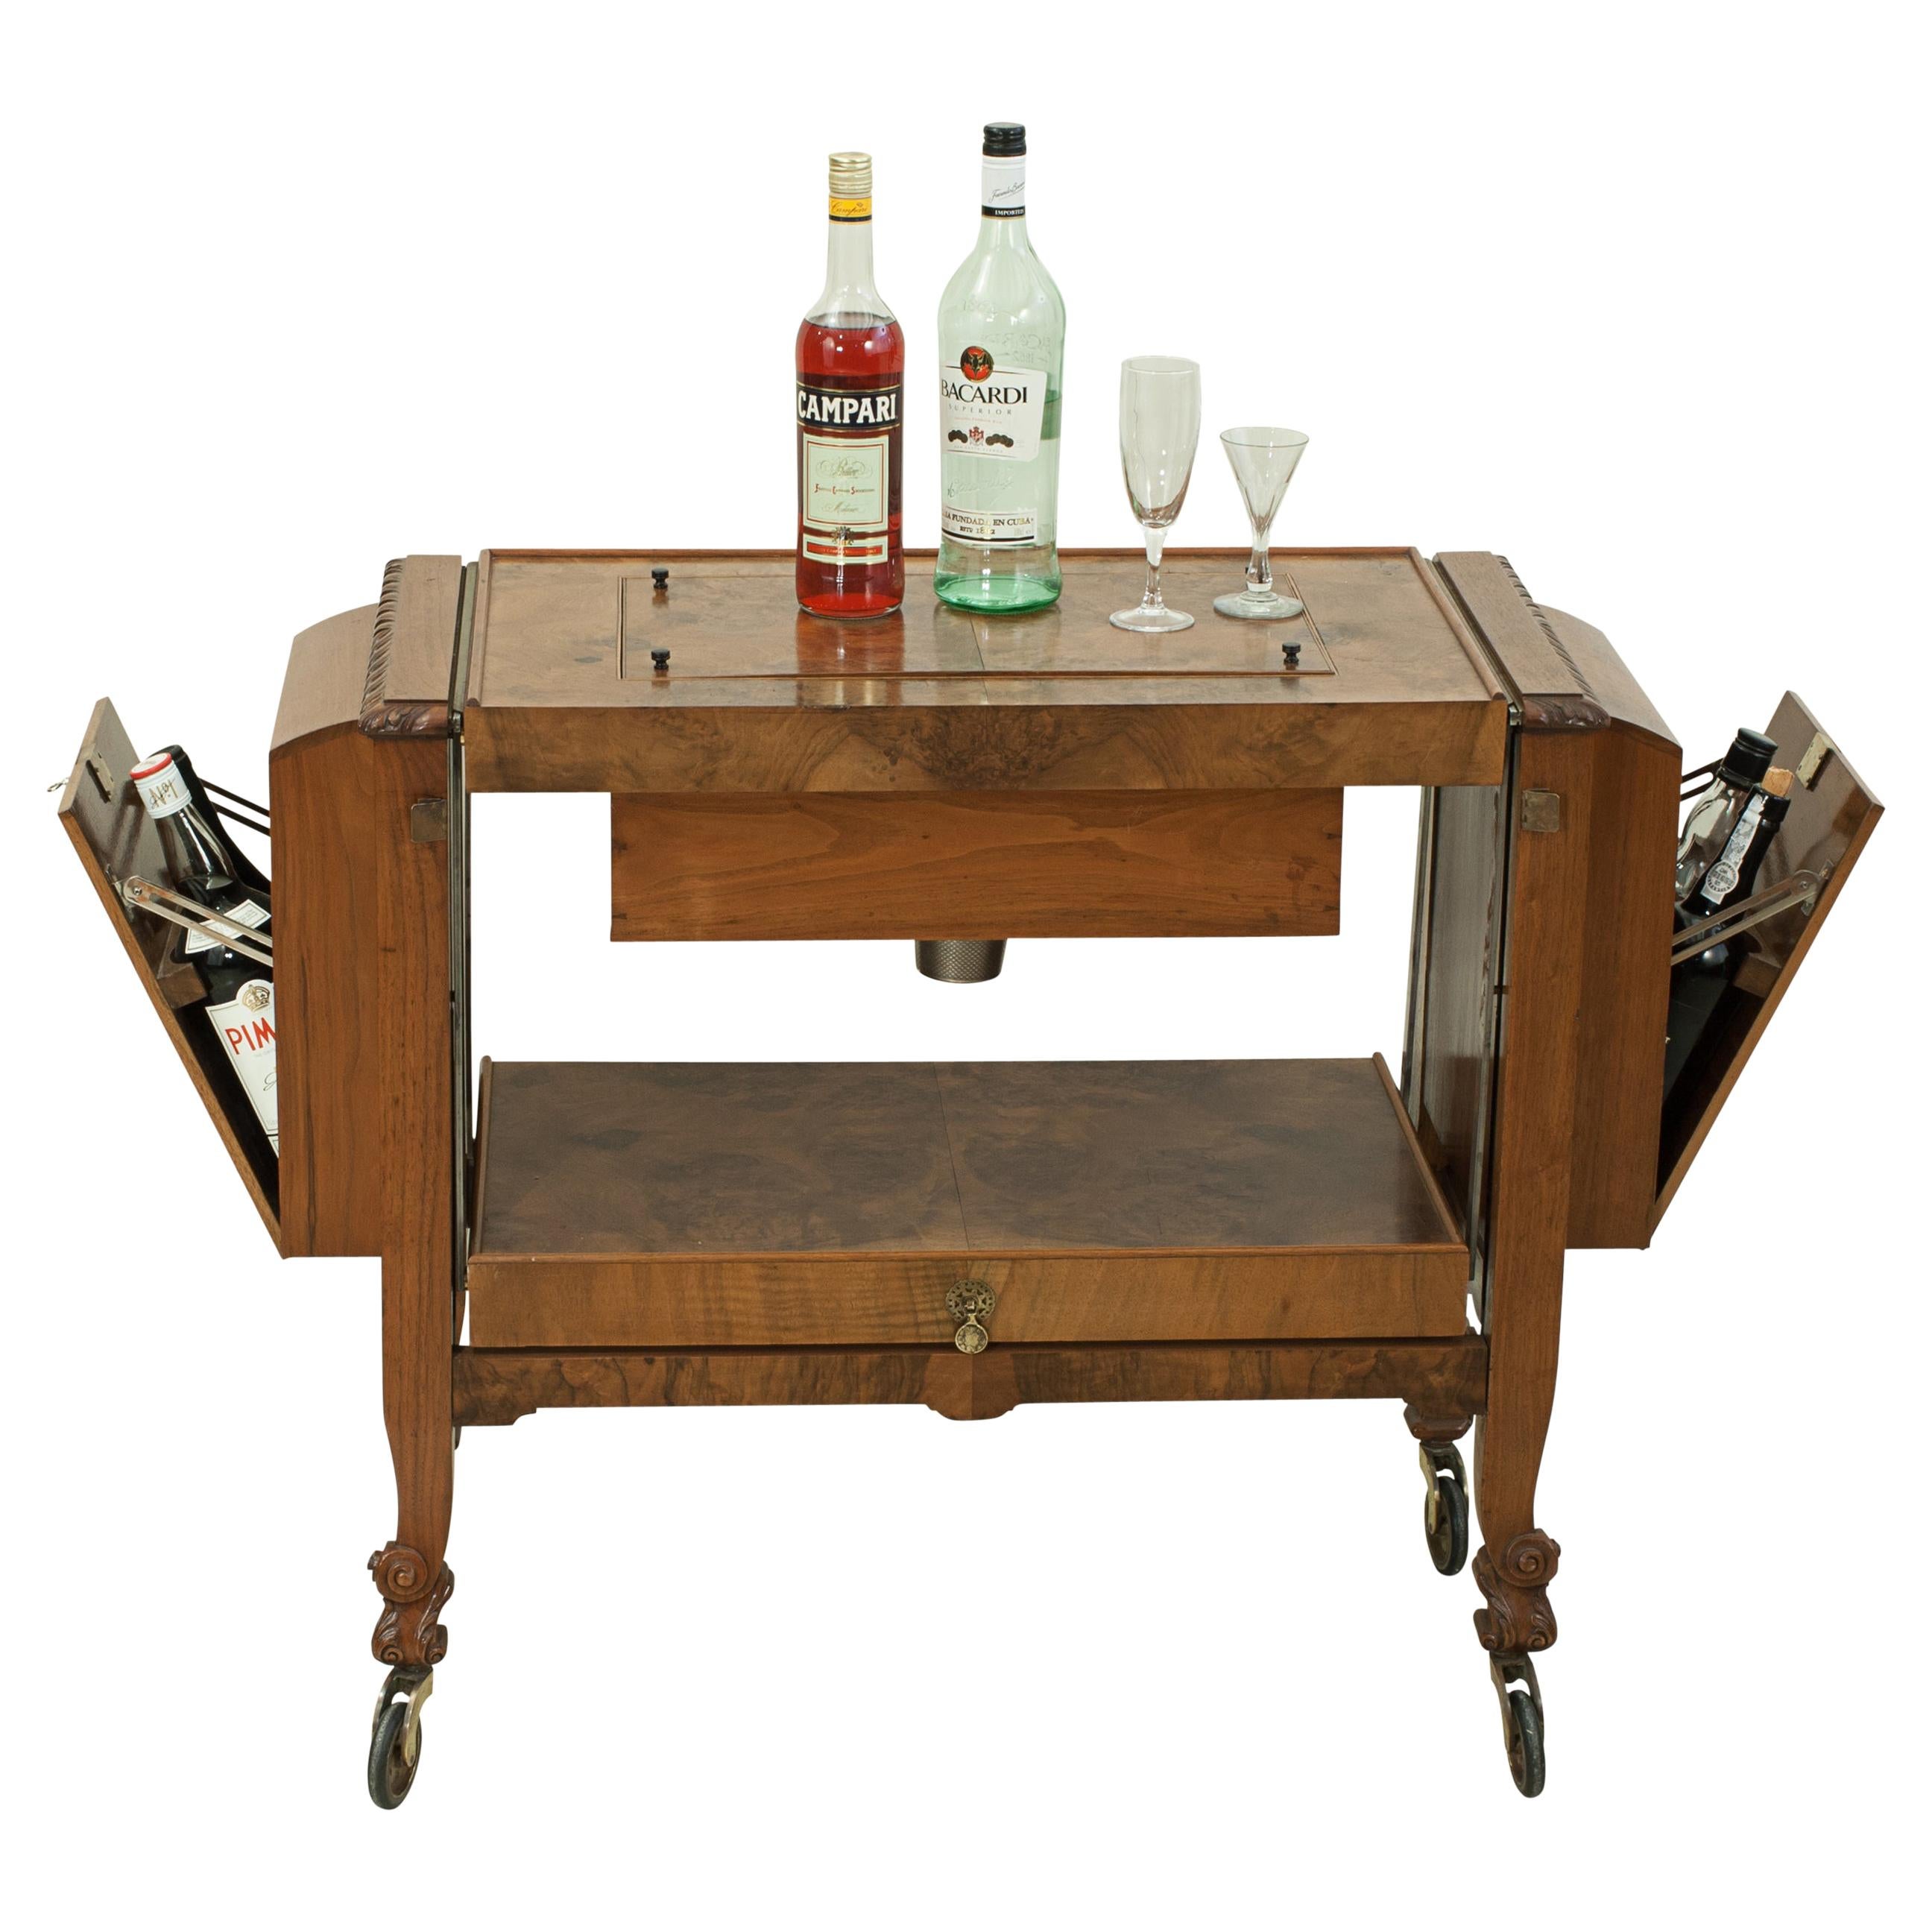 Metamorphic Drinks Table or Trolley, Cocktail Cabinet in Walnut